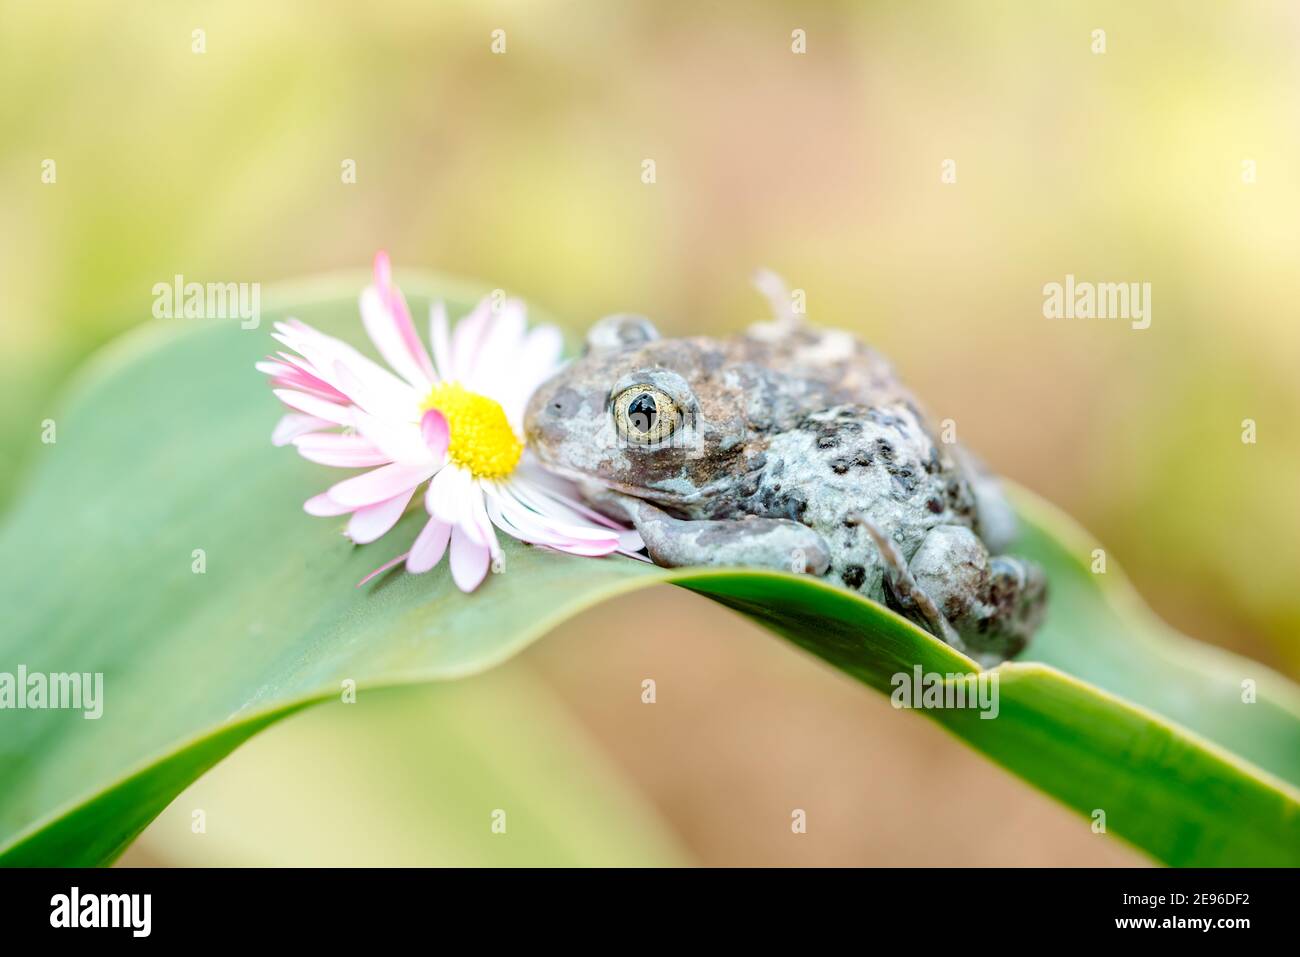 Dumpy Frogs Sitting on a Flower.Beautiful summer card. Stock Photo